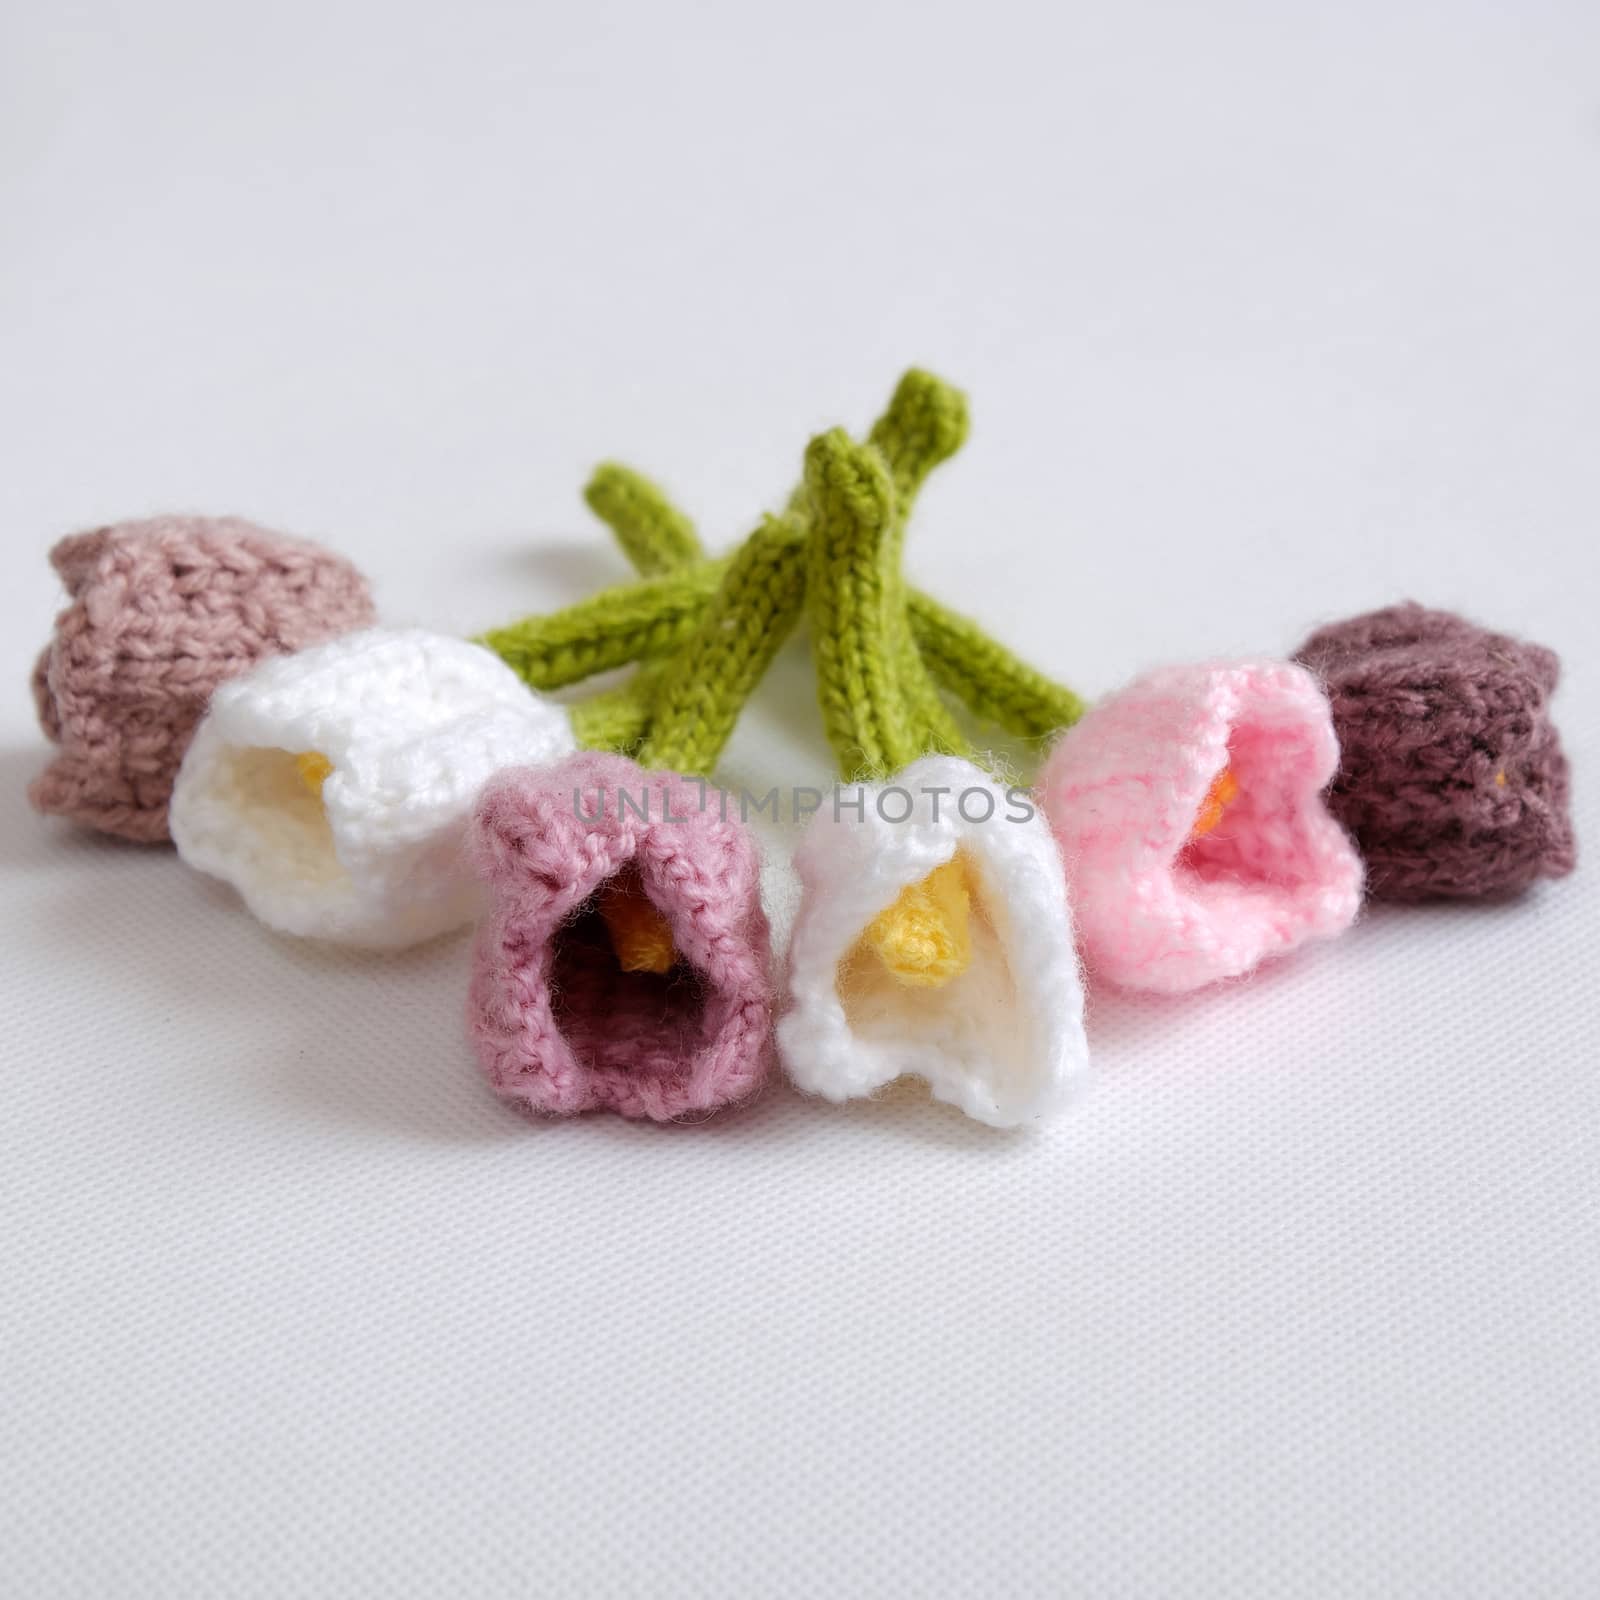 knit, knitting, knitted, yarn, wool, handmade, hand made, homemade, home made, flower, flowers, tulip, tulips, art, colorful, floral, flora, vietnam, viet nam, vietnamese, spring, spring flowers, bouquet, woman day, mothers day, springtime, decor, home, ornament, tet, lunar new year, hobby, diy, meaningful, abstract, leisure, color, colour, woolen, white background, background, white, product, gift